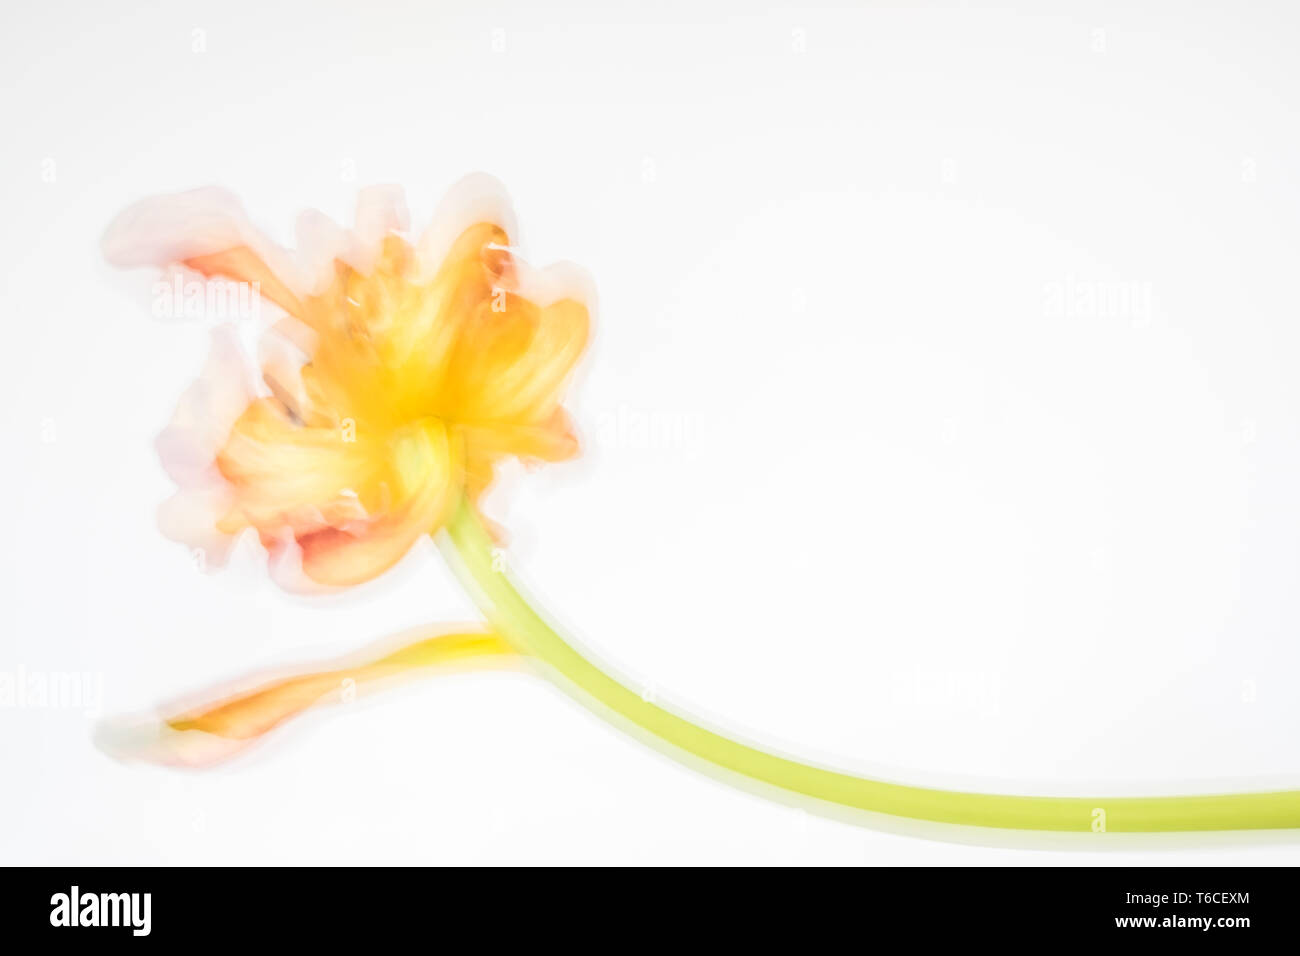 Abstract, colorful tulip moved away from camera while stem held steady, creates fun background image Stock Photo